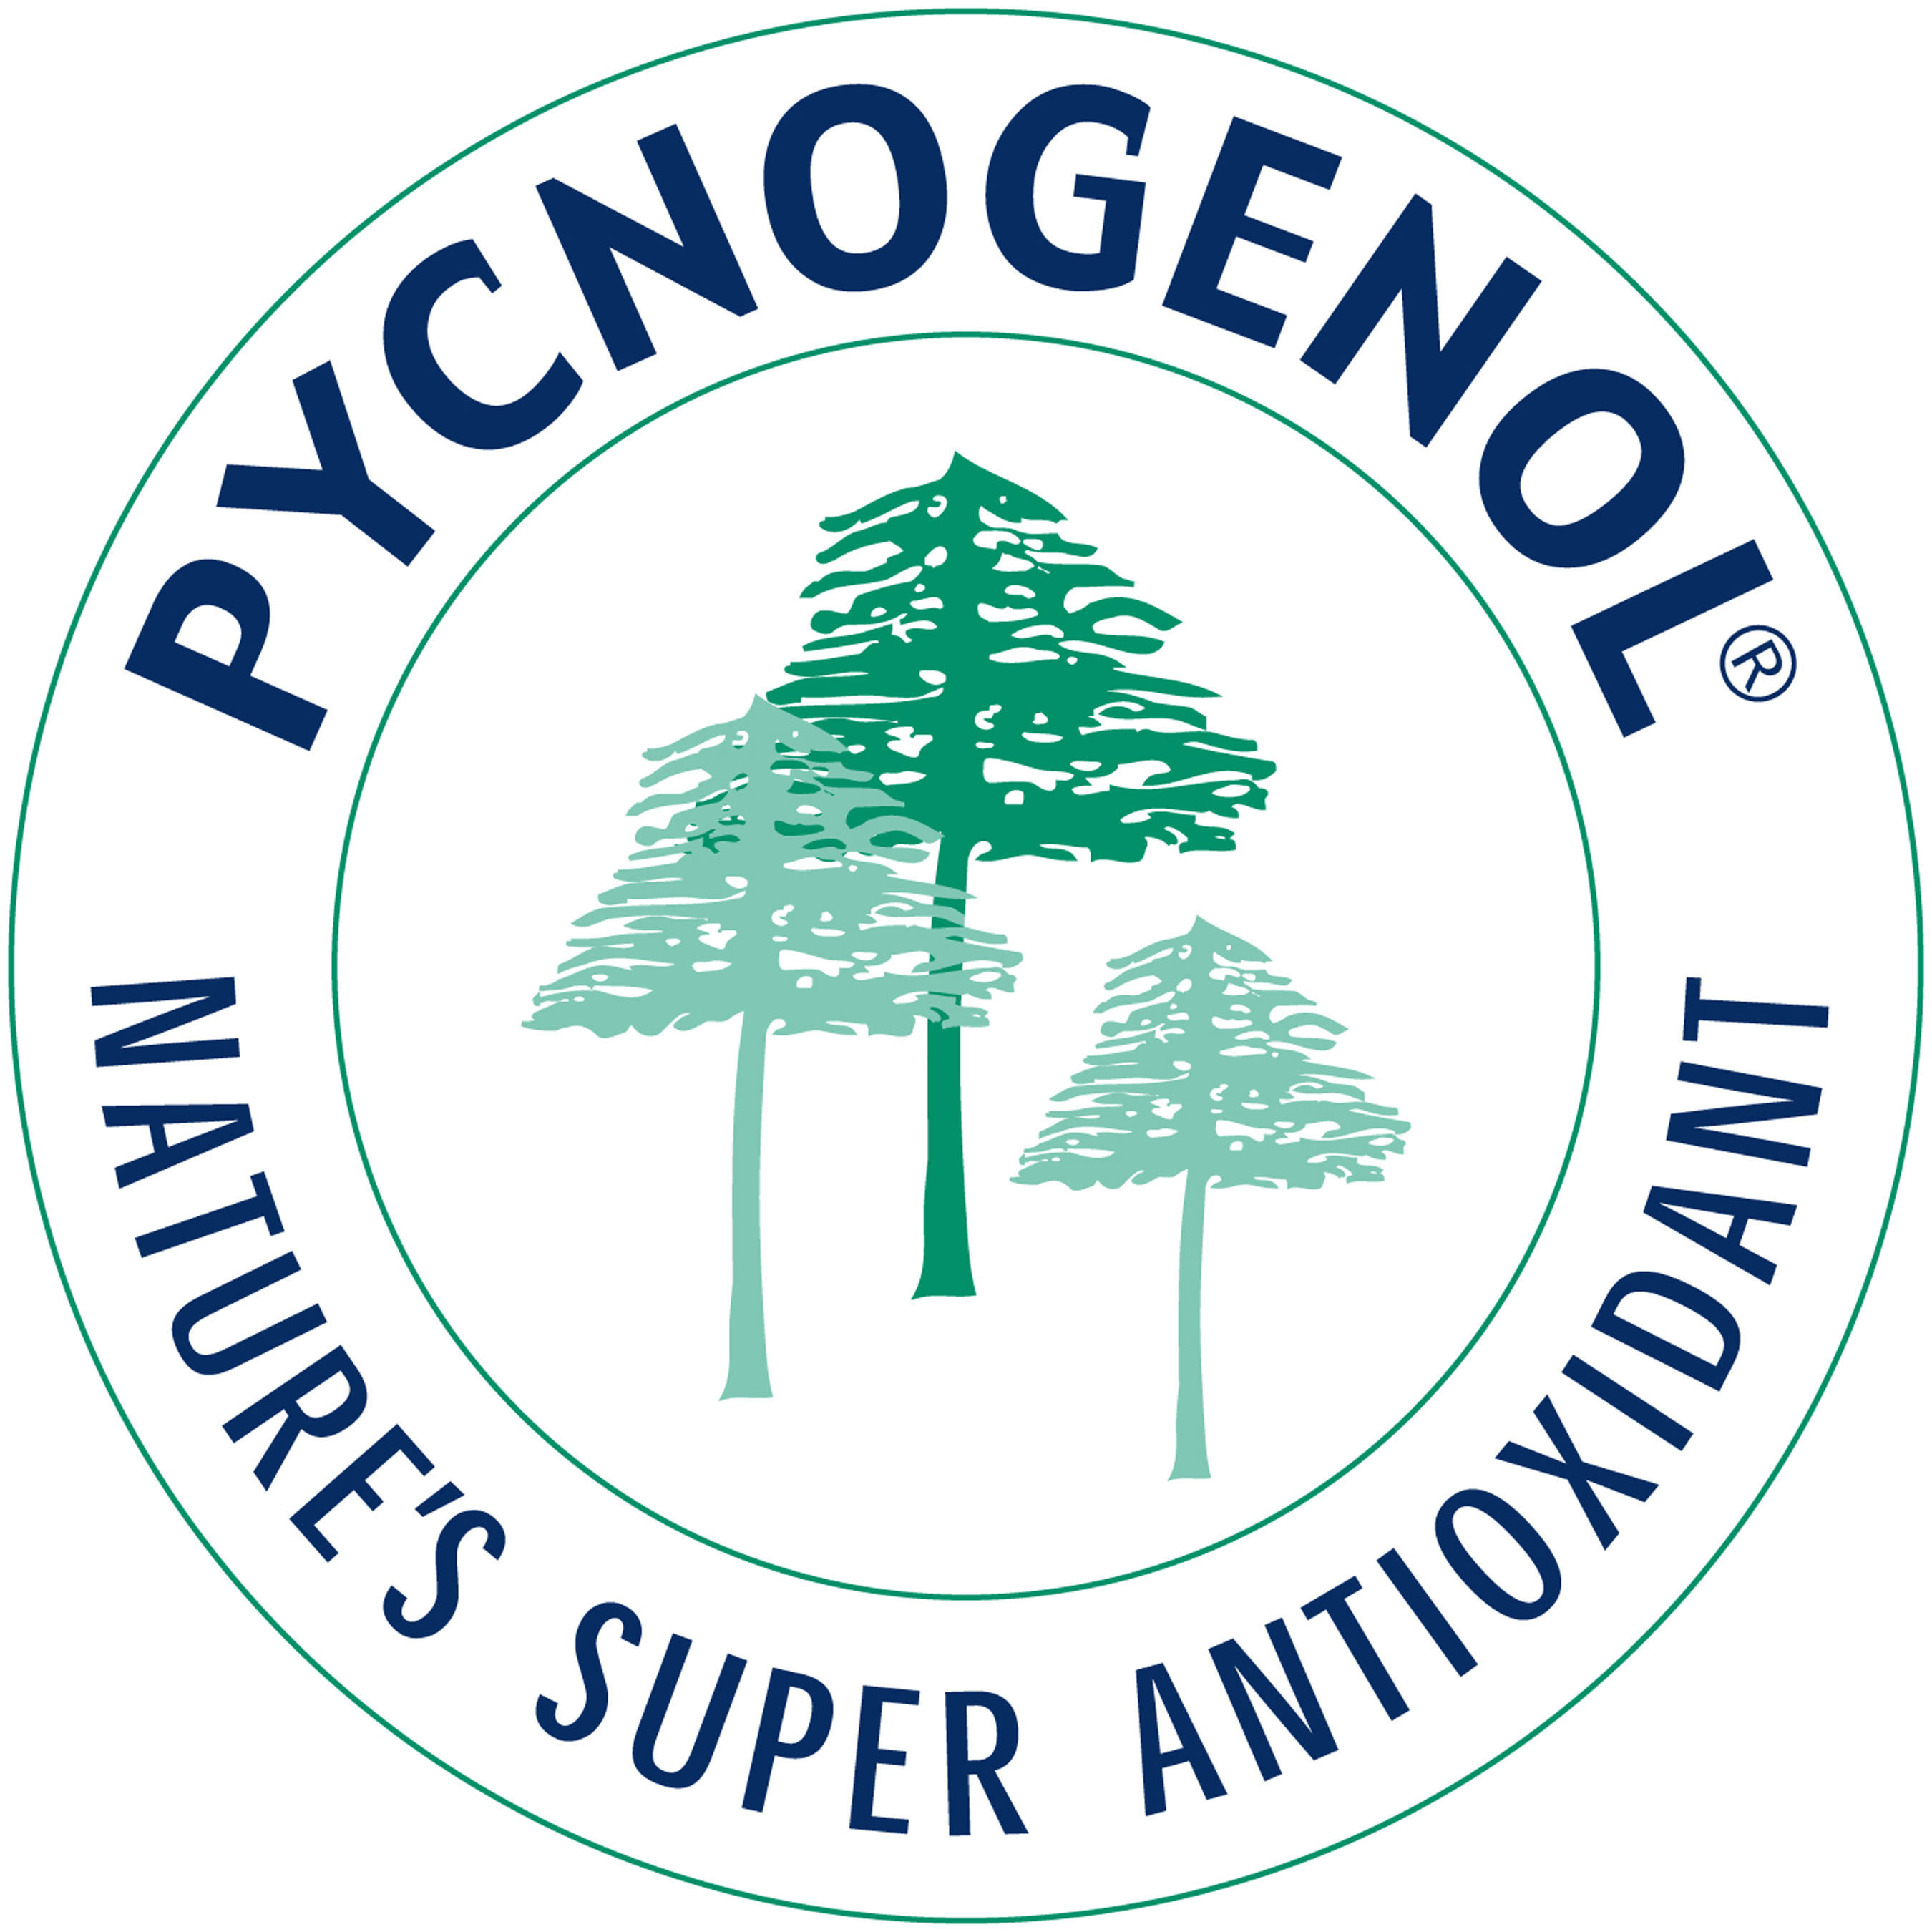 Pycnogenol(R) is a natural plant extract originating from the bark of the maritime pine that grows along the coast of southwest France and is found to contain a unique combination of procyanidins, bioflavonoids and organic acids, which offer extensive natural health benefits.